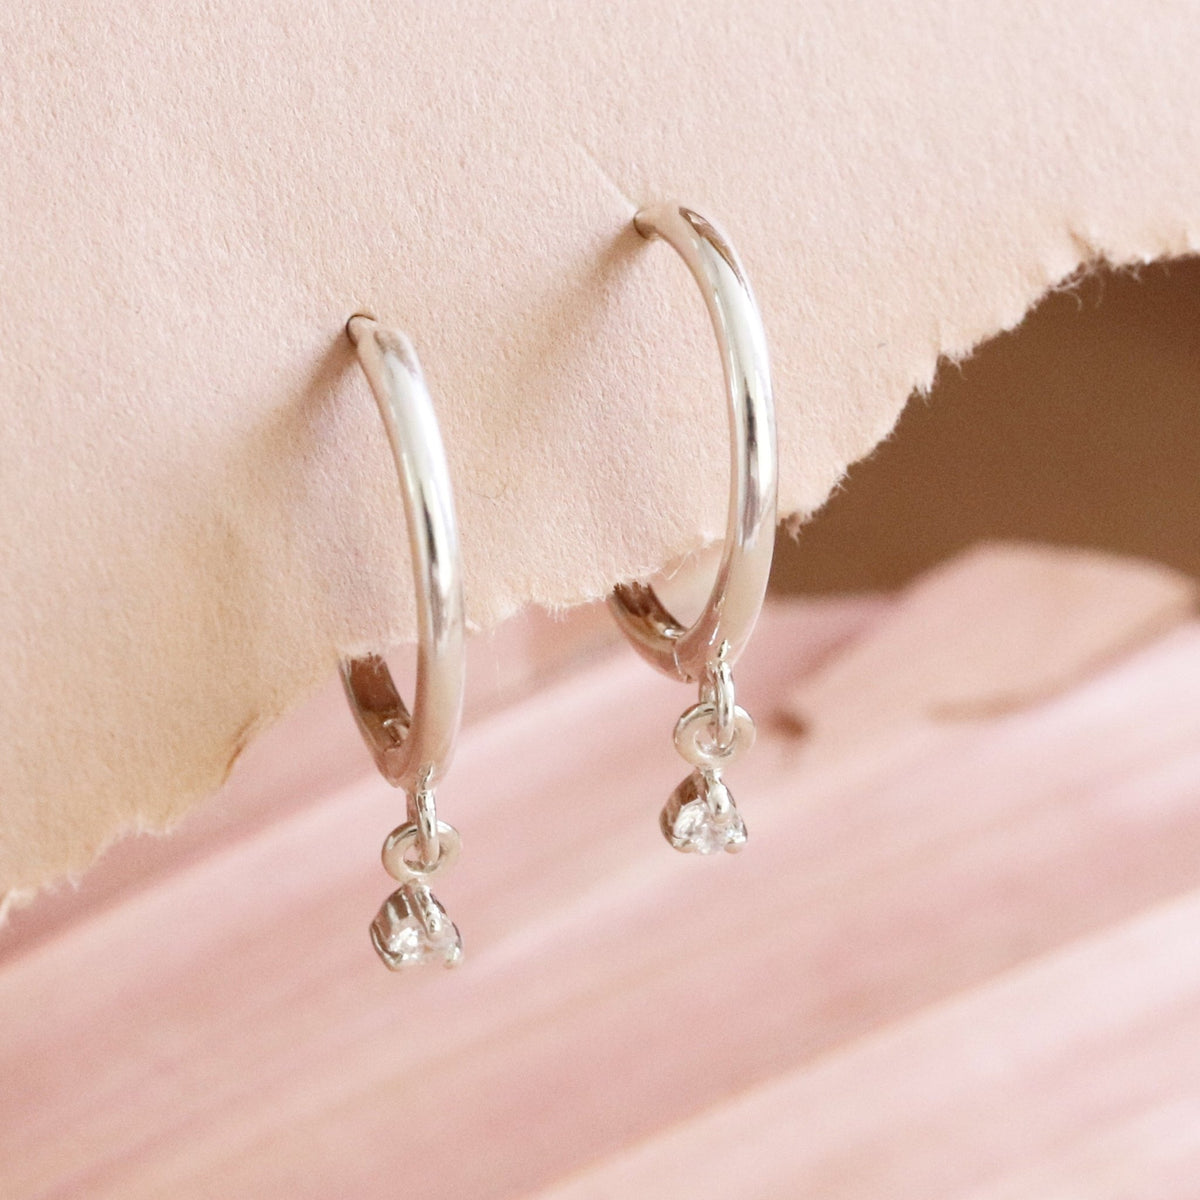 LOVE CHARM HUGGIE HOOPS - CUBIC ZIRCONIA &amp; SILVER - SO PRETTY CARA COTTER